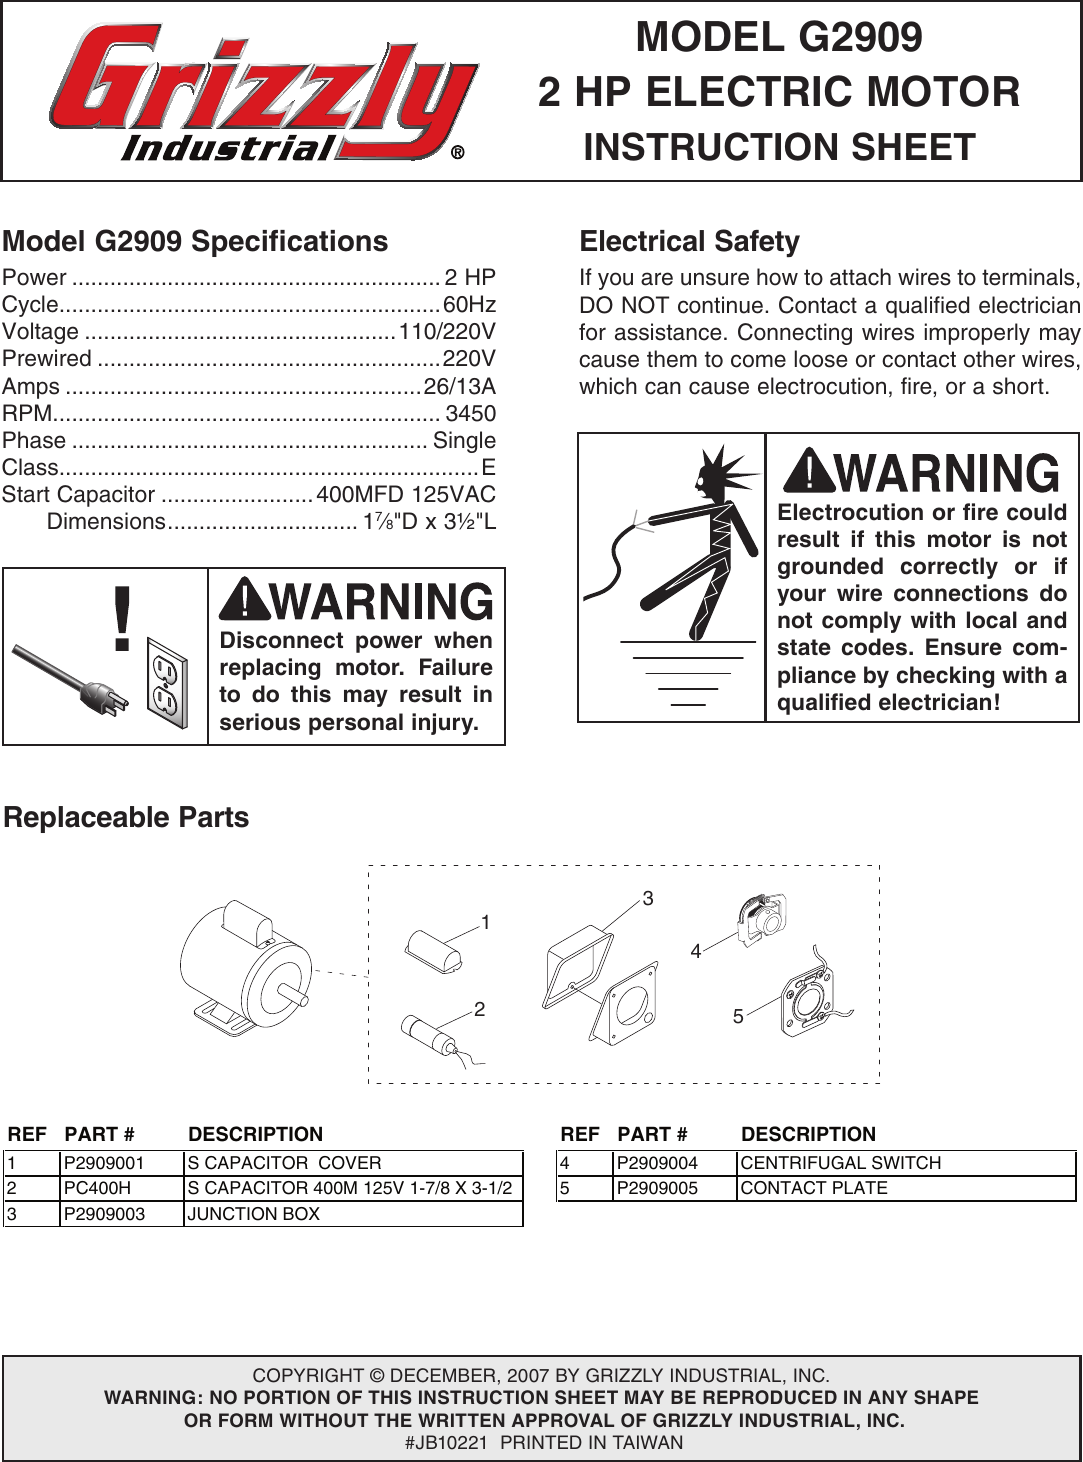 Page 1 of 2 - Grizzly G2909 Wiring Diagram User Manual  To The C2a44c36-2b6a-4226-93fc-c2c8c37cf40c